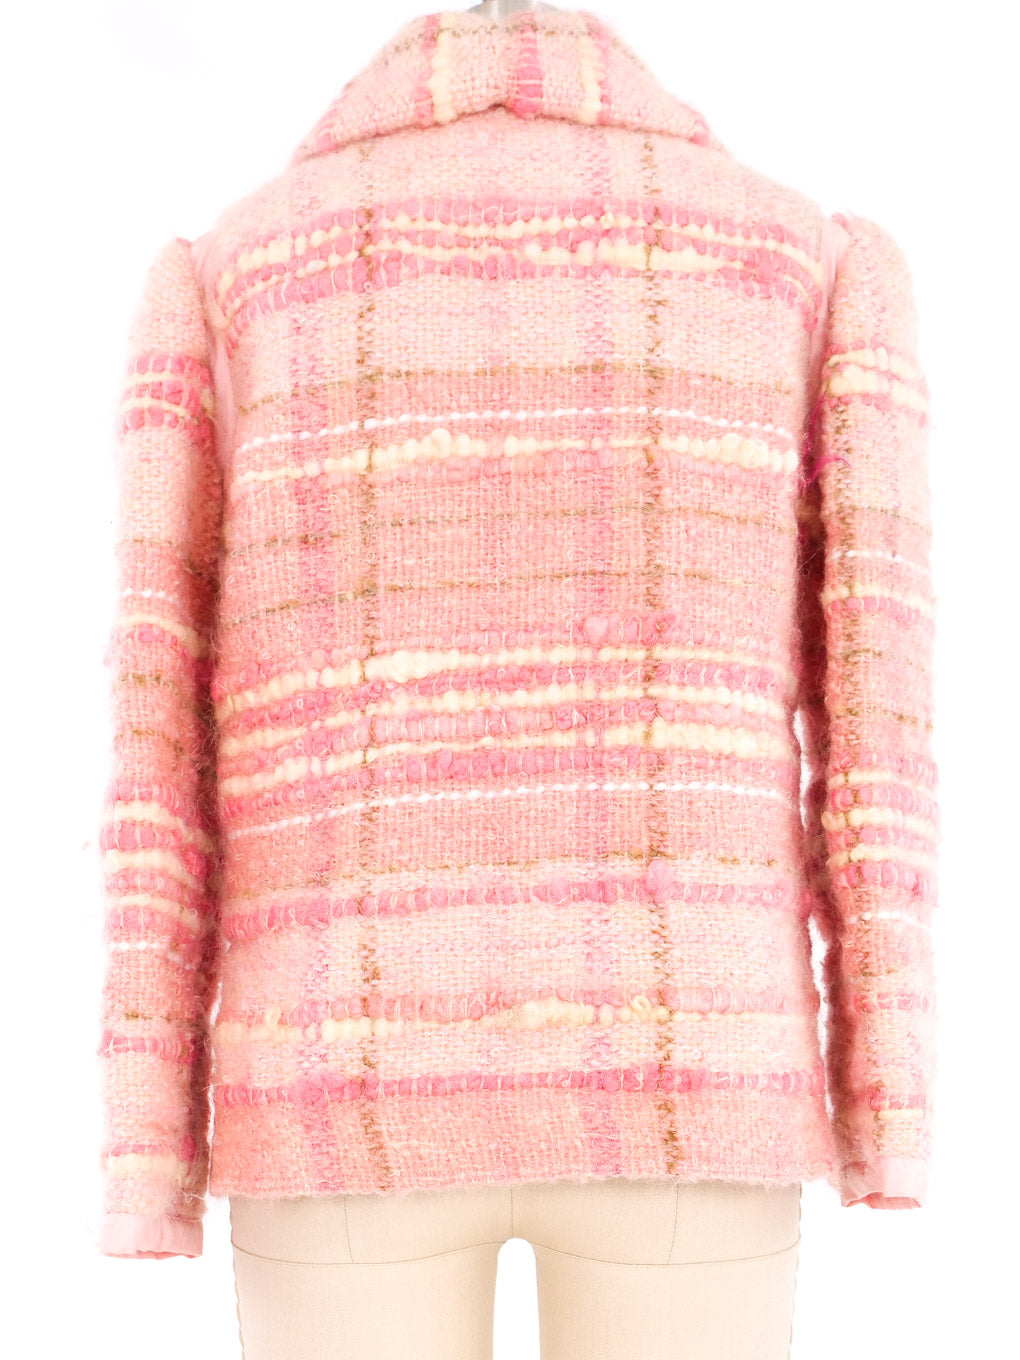 NEW/FOUND 1960s Courreges Pink Mohair Tweed Jacket